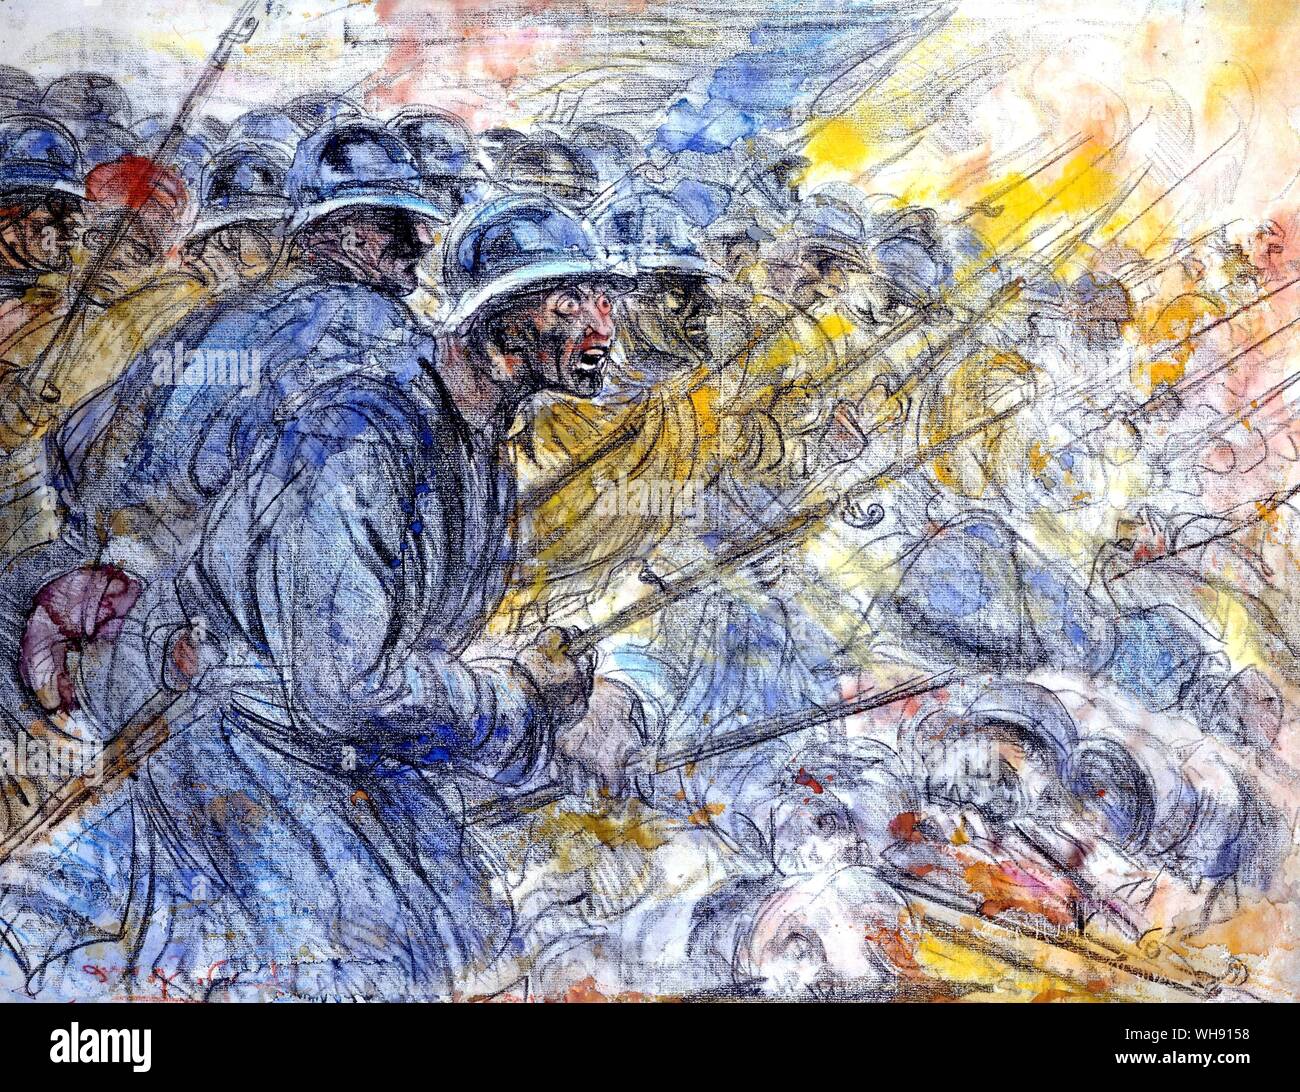 The mincer ground on French troops counter attack yet again at Verdun painting by H de Groux Stock Photo